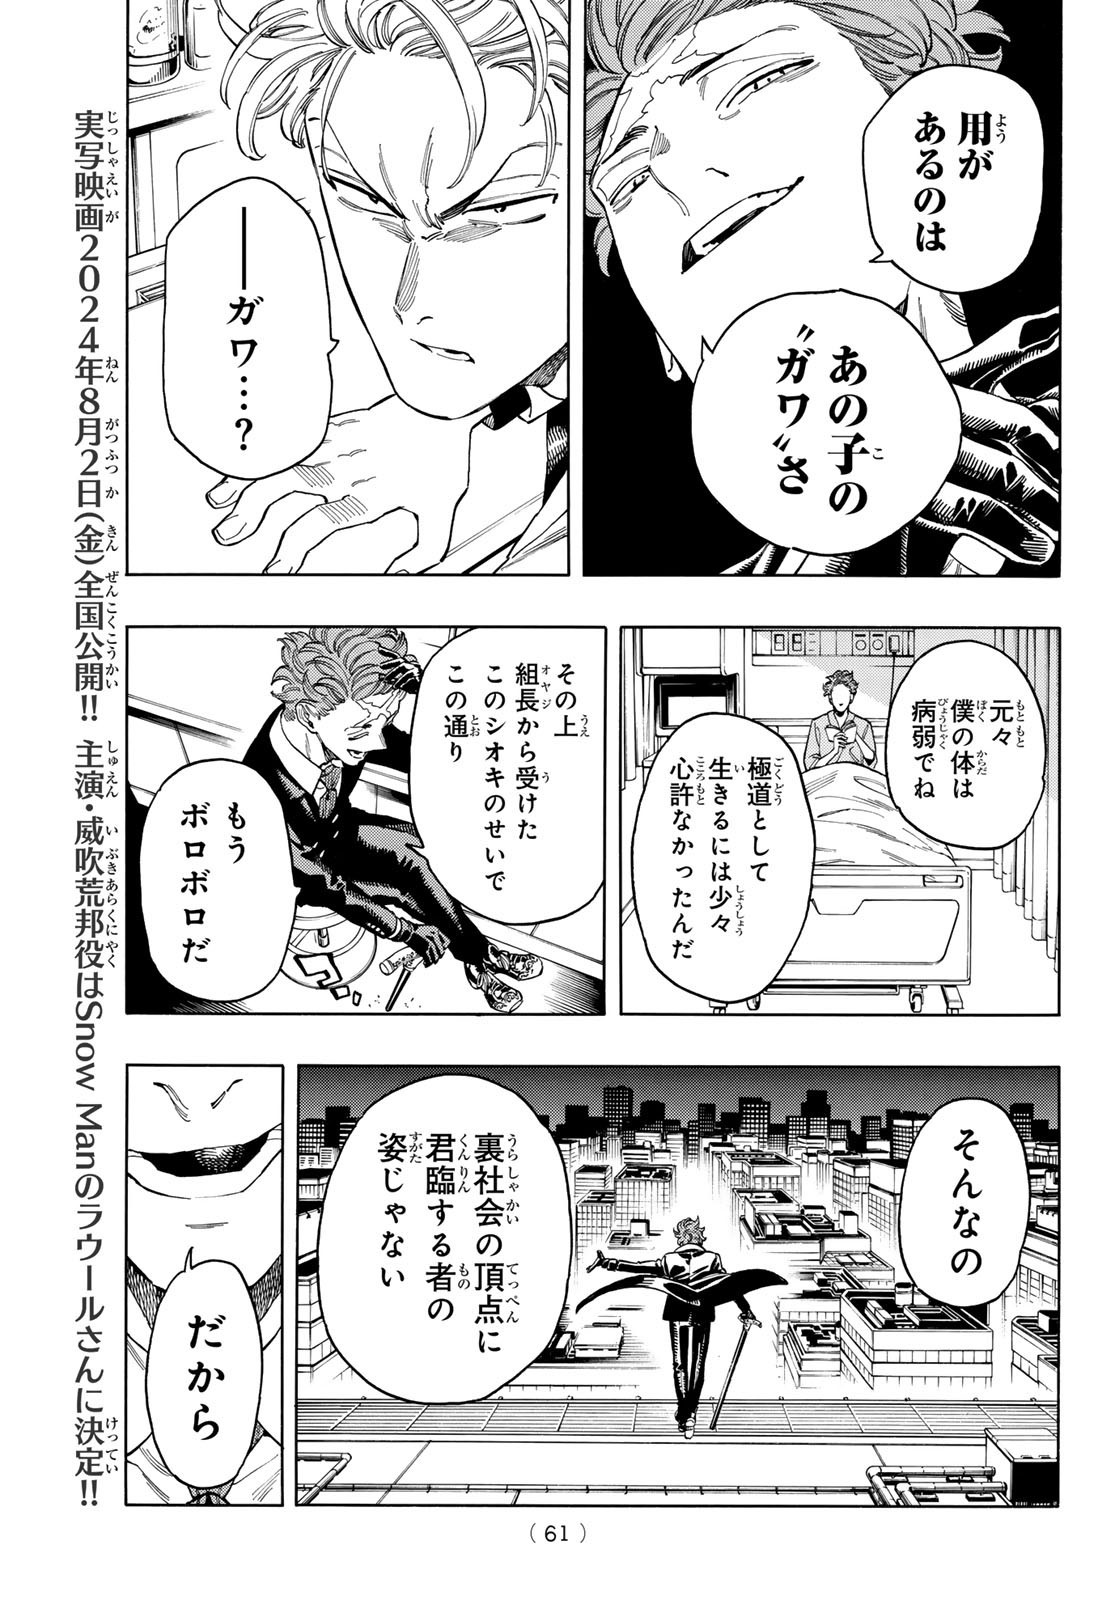 Weekly Shōnen Magazine - 週刊少年マガジン - Chapter 2024-31 - Page 60